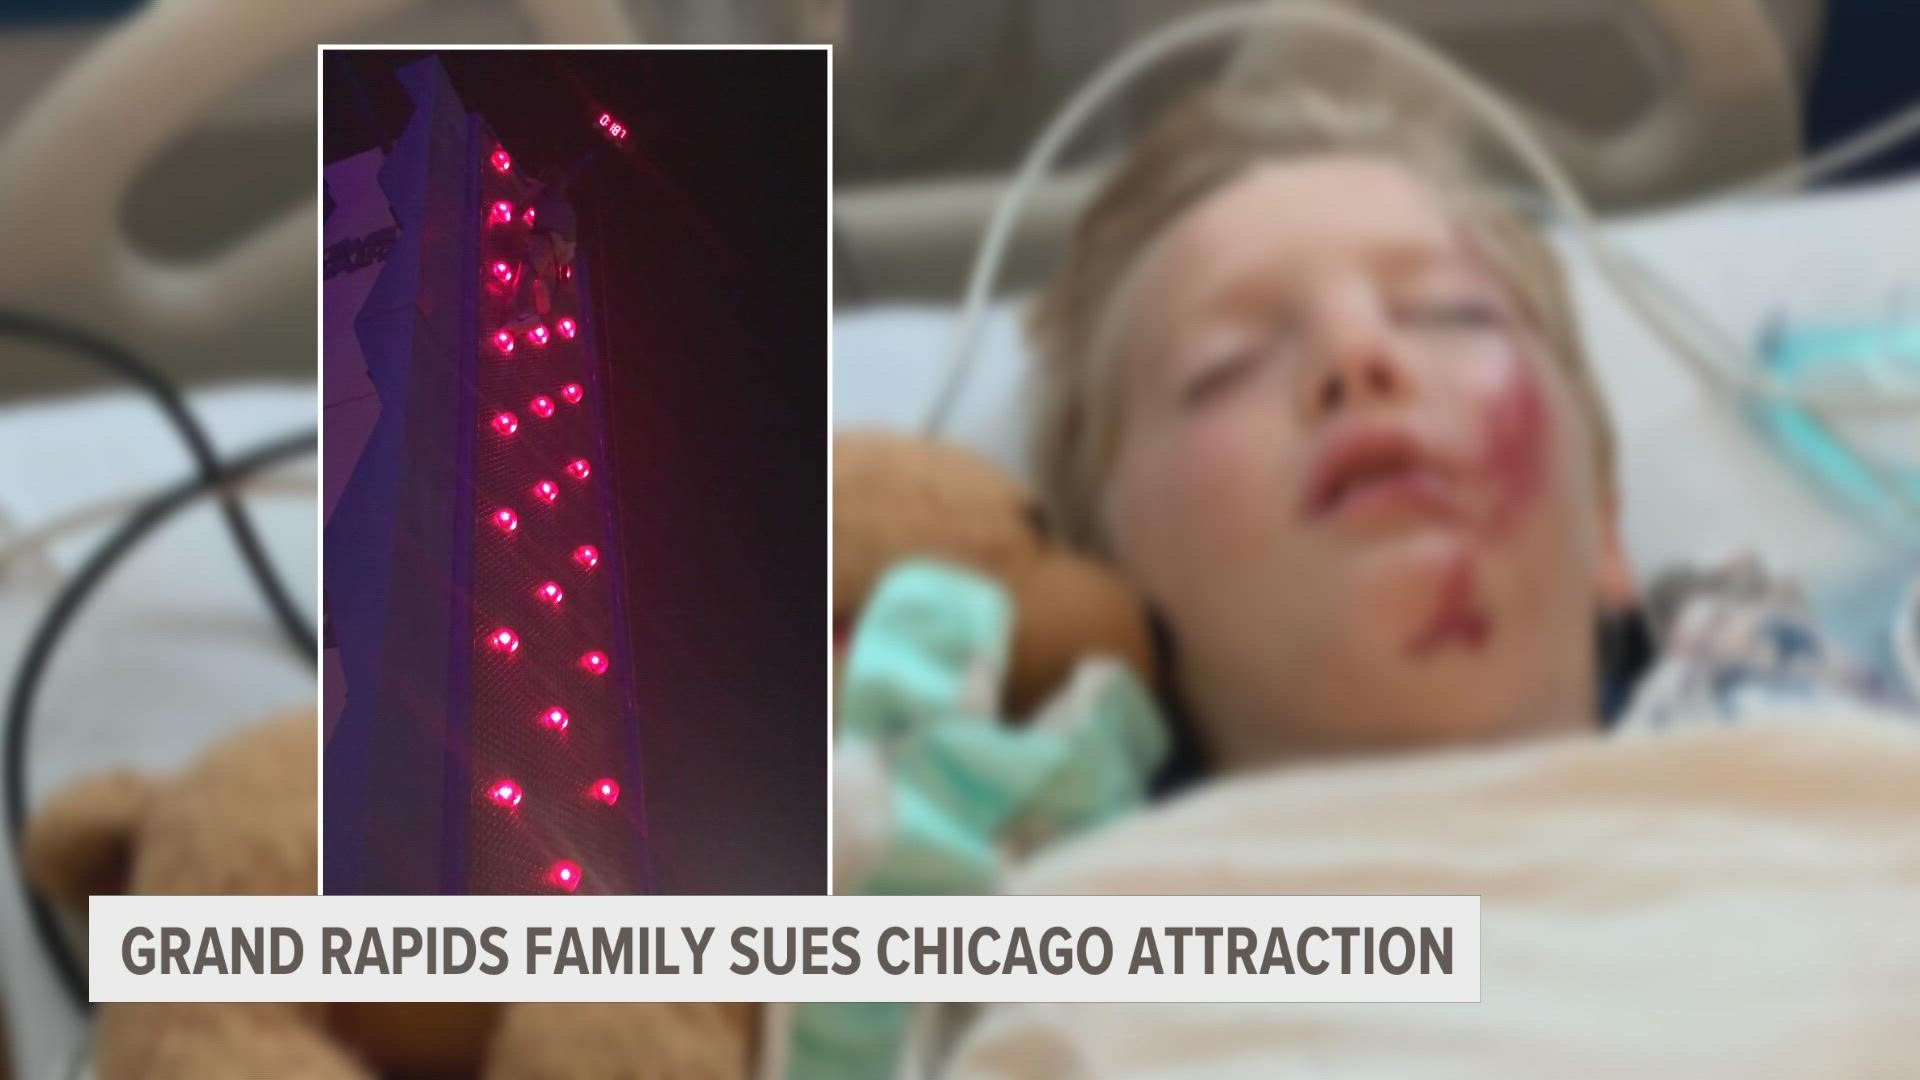 The lawsuit says the child was not properly secured to the climbing wall by Navy Pier staff. A shocking video captured the boy’s 24-foot fall to the concrete.